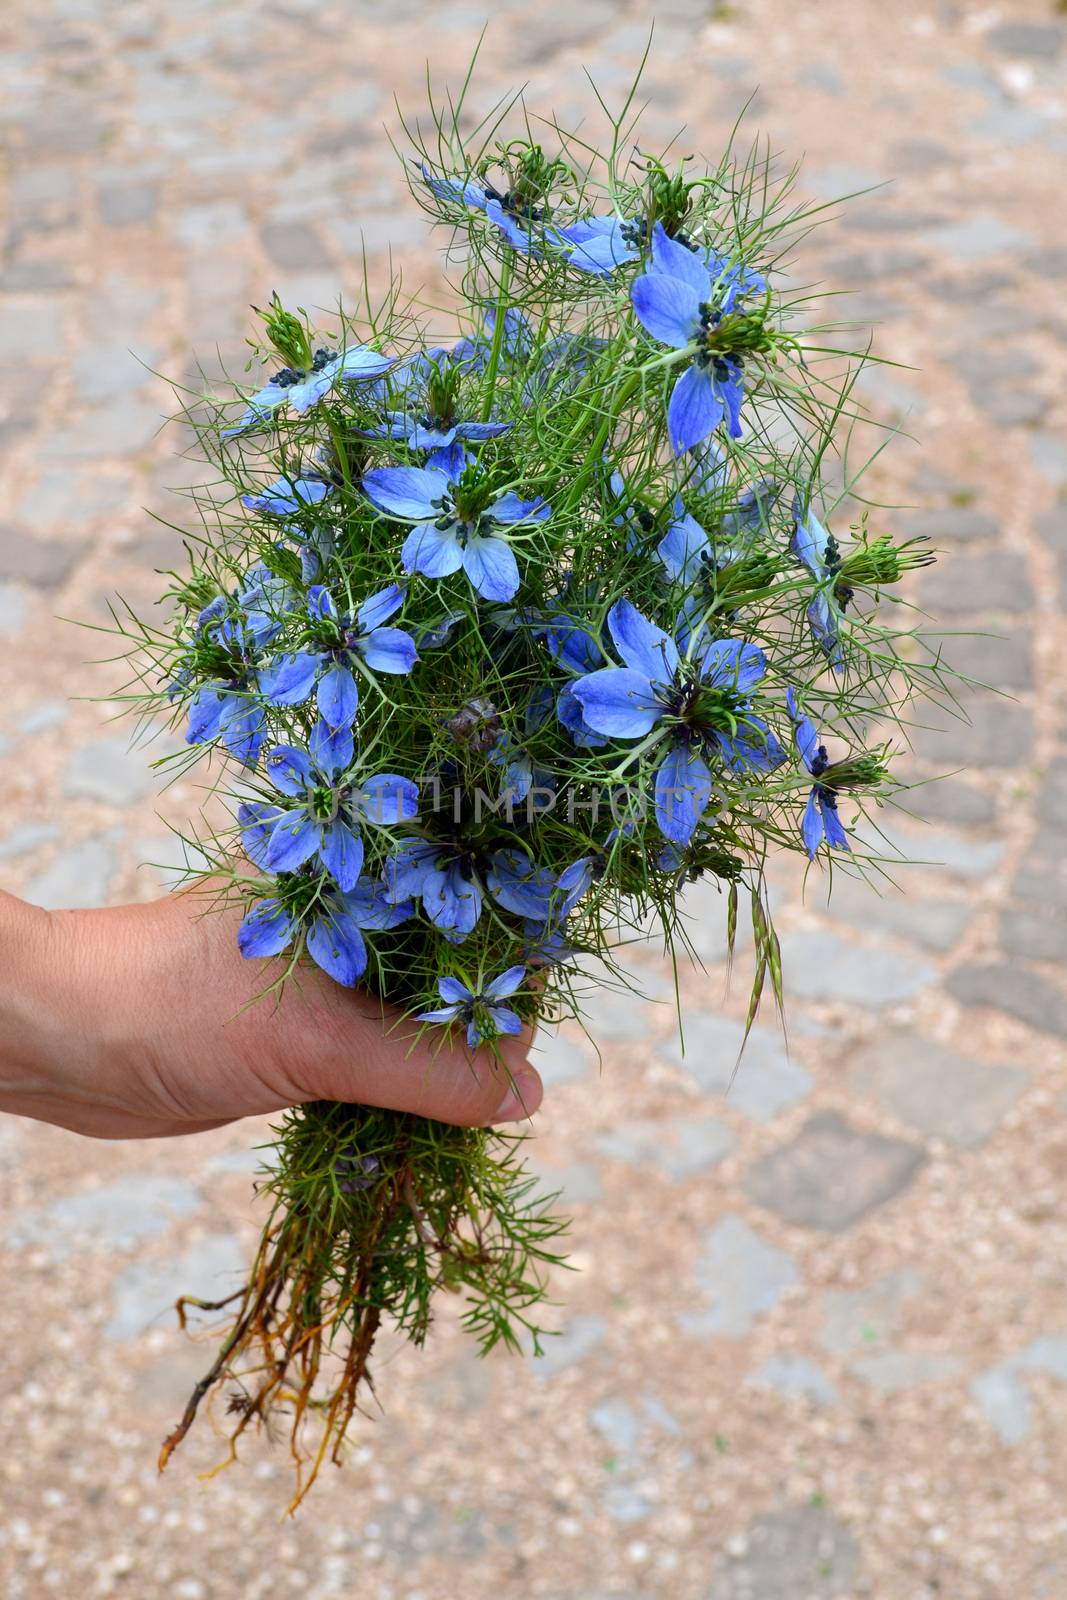 Woman hand holding a blue flowers bouquet by hibrida13